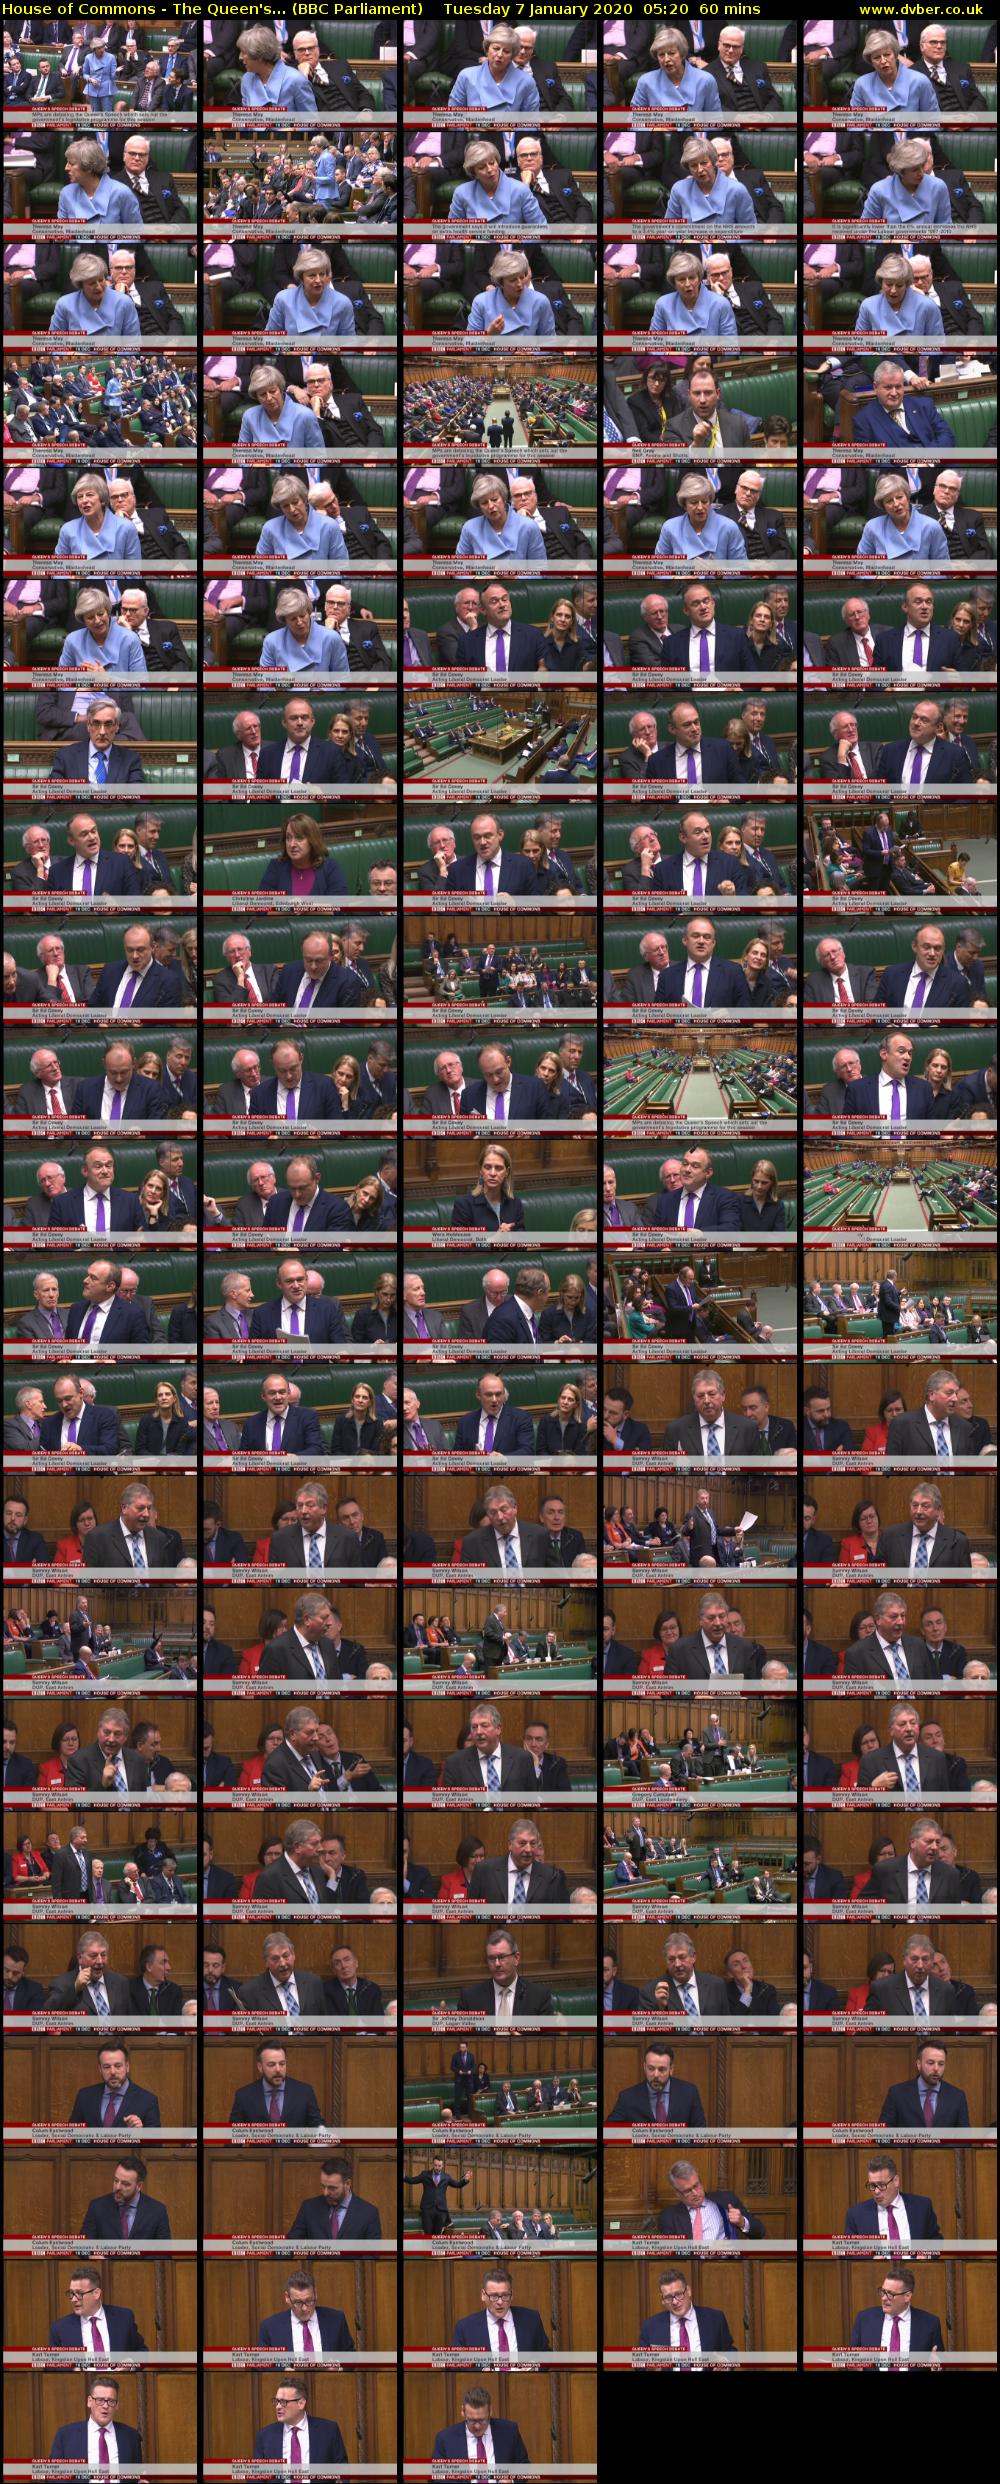 House of Commons - The Queen's... (BBC Parliament) Tuesday 7 January 2020 05:20 - 06:20